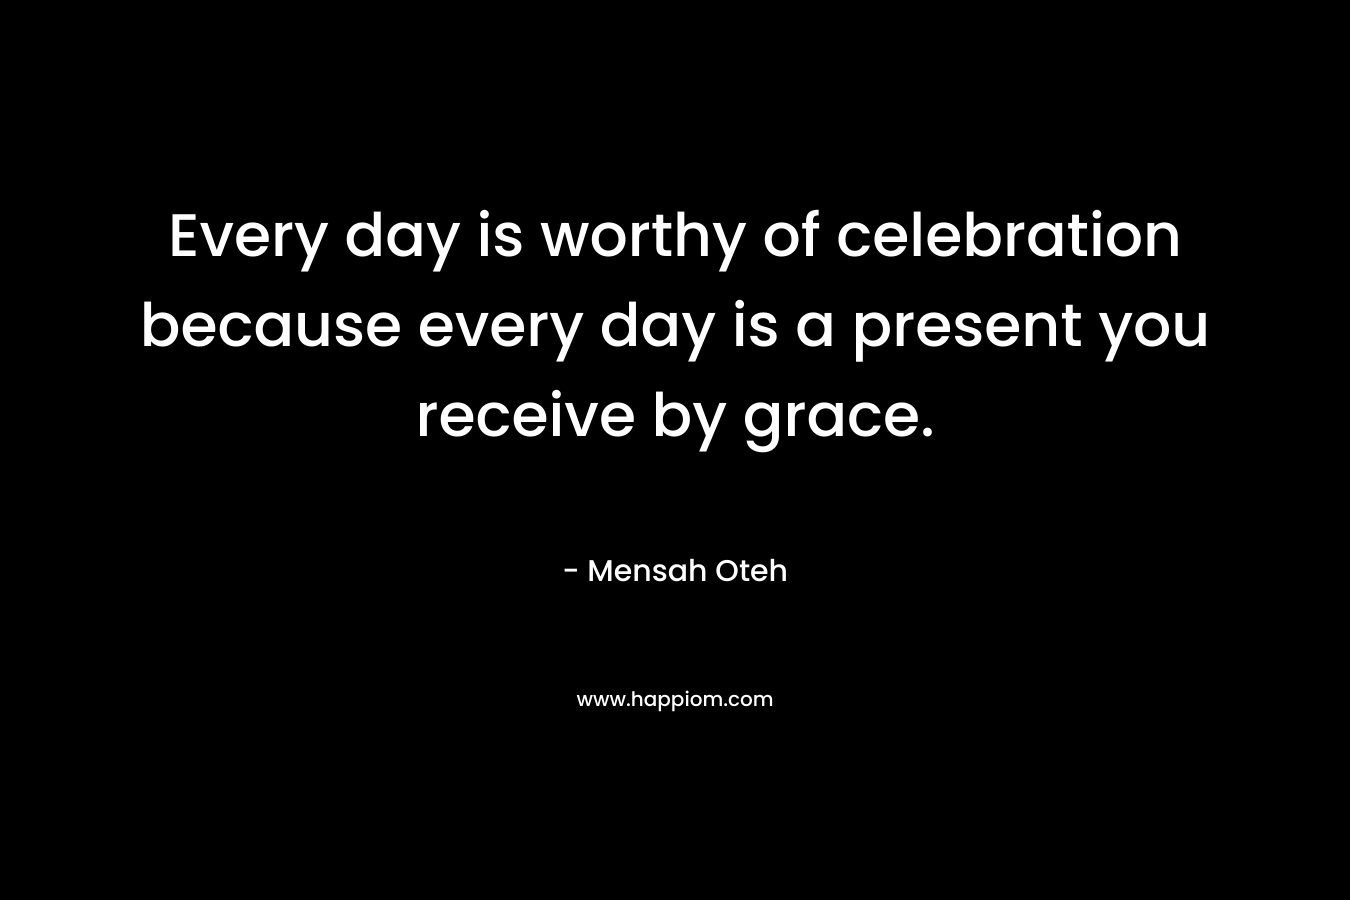 Every day is worthy of celebration because every day is a present you receive by grace.